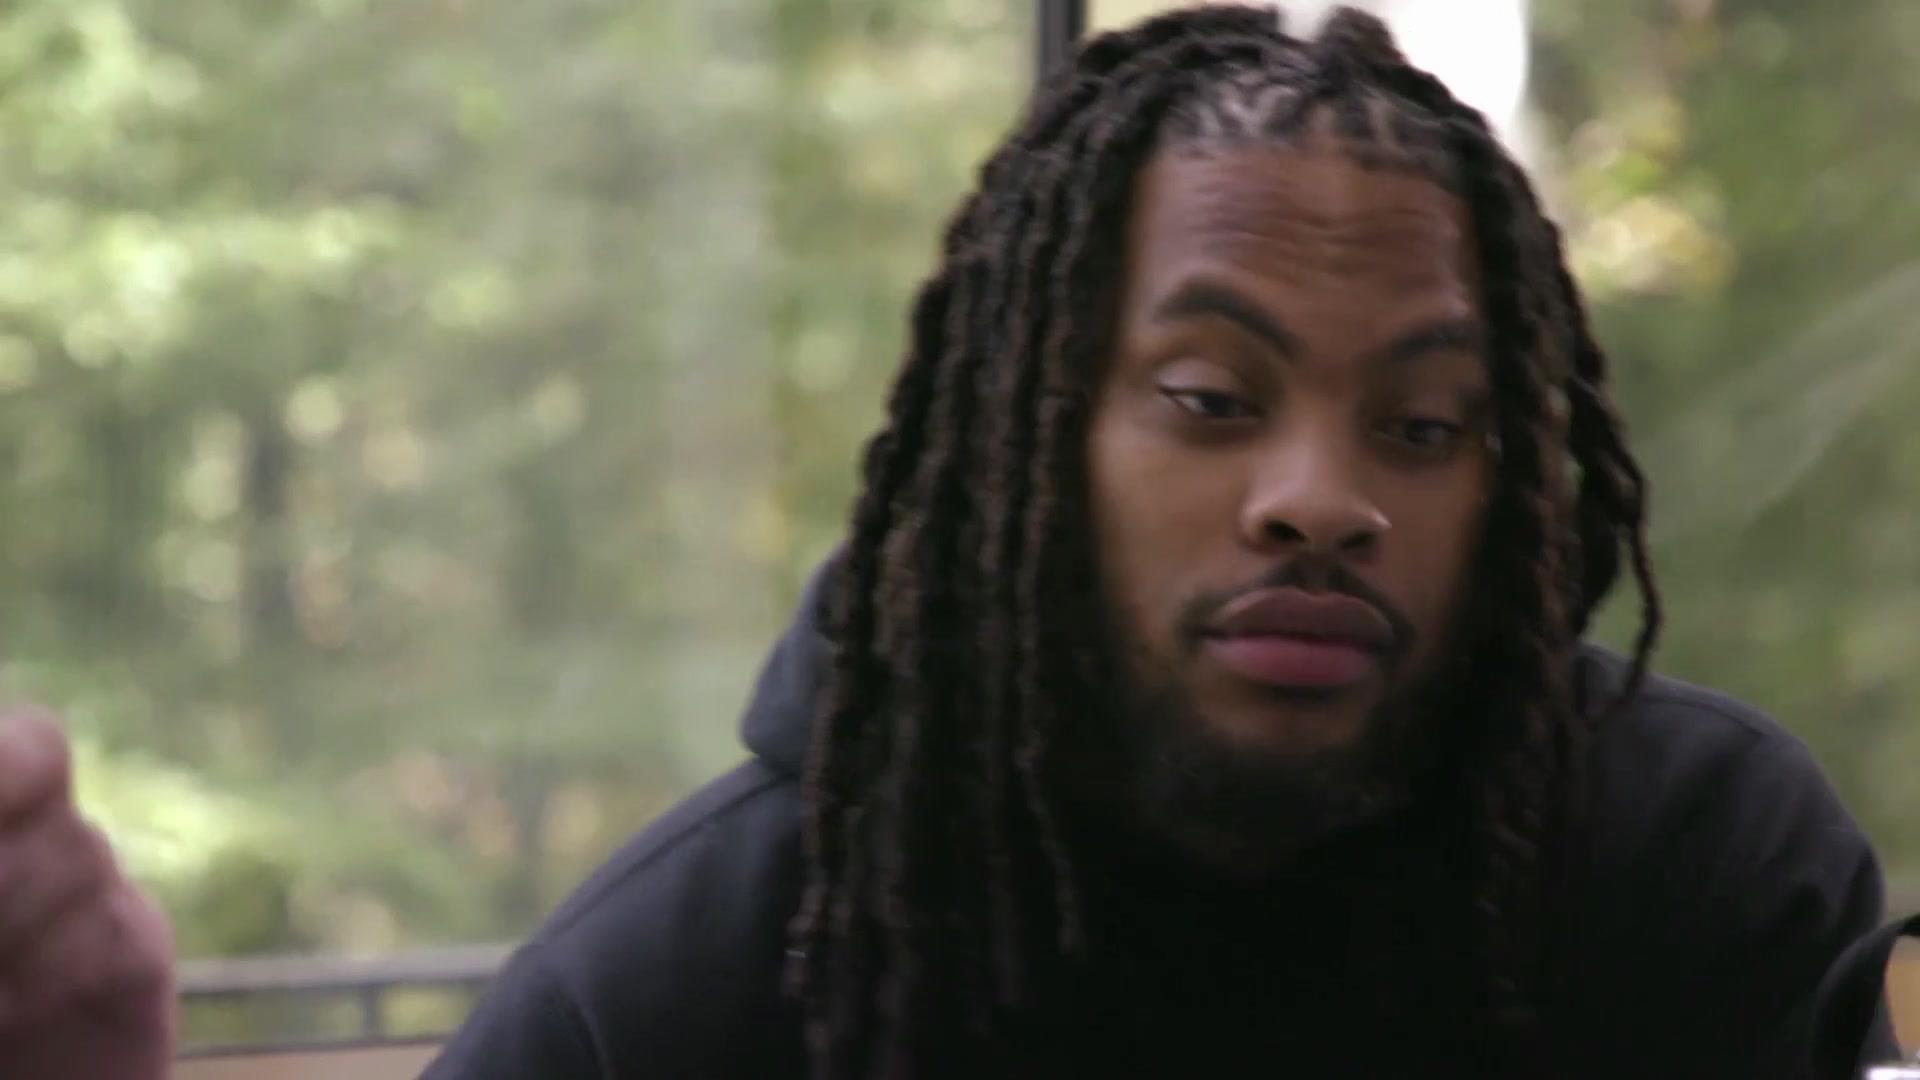 Watch Tammy's Stalker Situation Is Getting Serious! | Waka & Tammy Video Extras